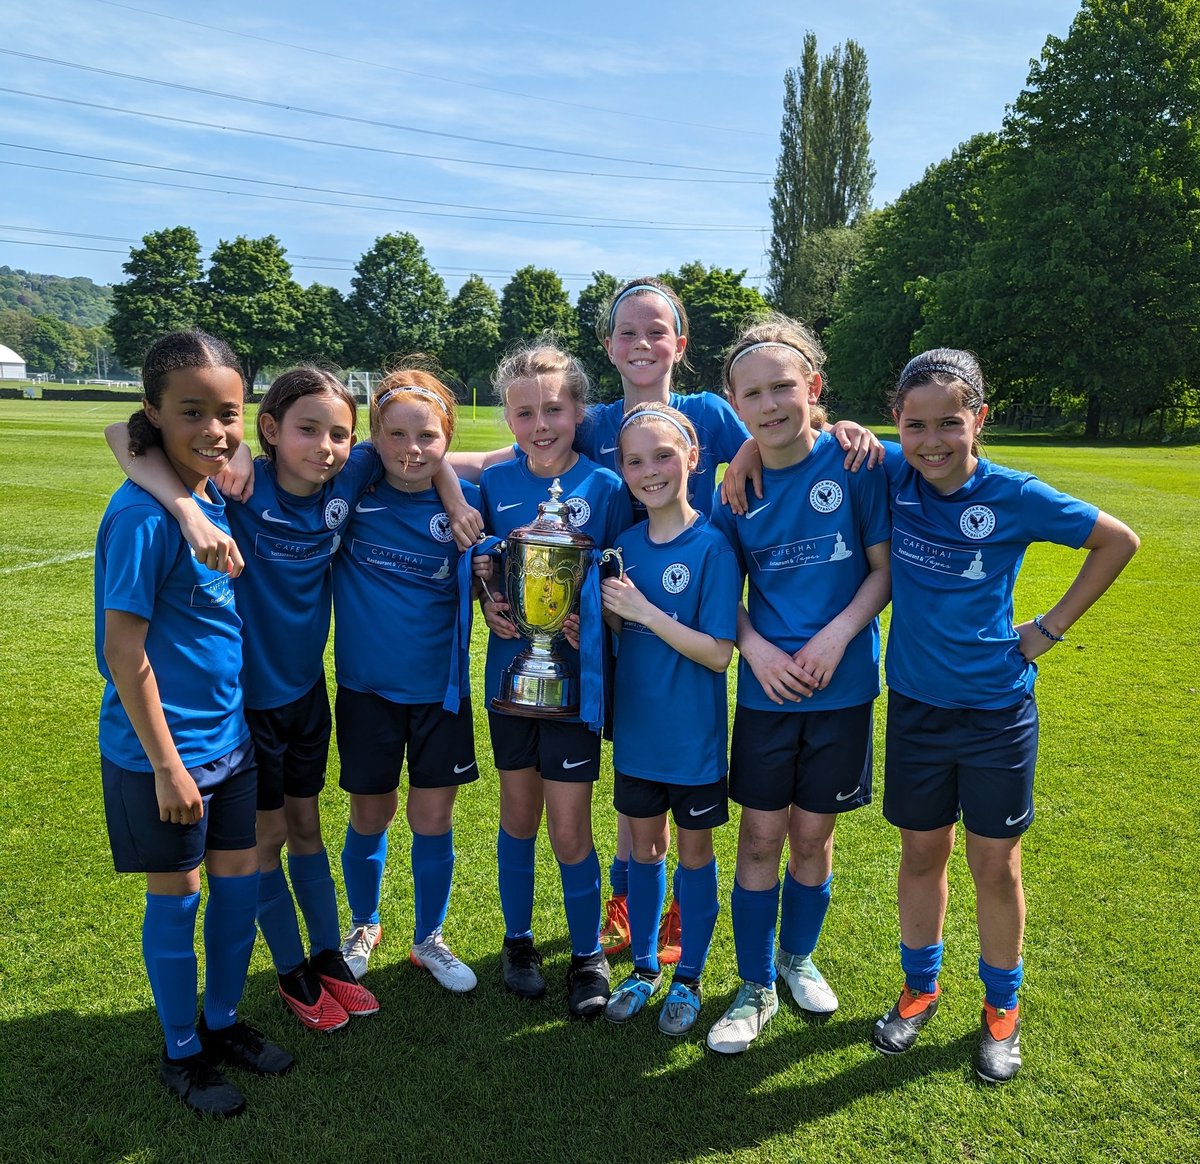 GIRLS FOOTBALL We are looking for girls in current school year's 7 & 8 for our 2024/25 U14 Girls Team! We are looking for outfield players to come and join our girls programme for the new season. Anyone interested in attending a trial session should fill out the form below and